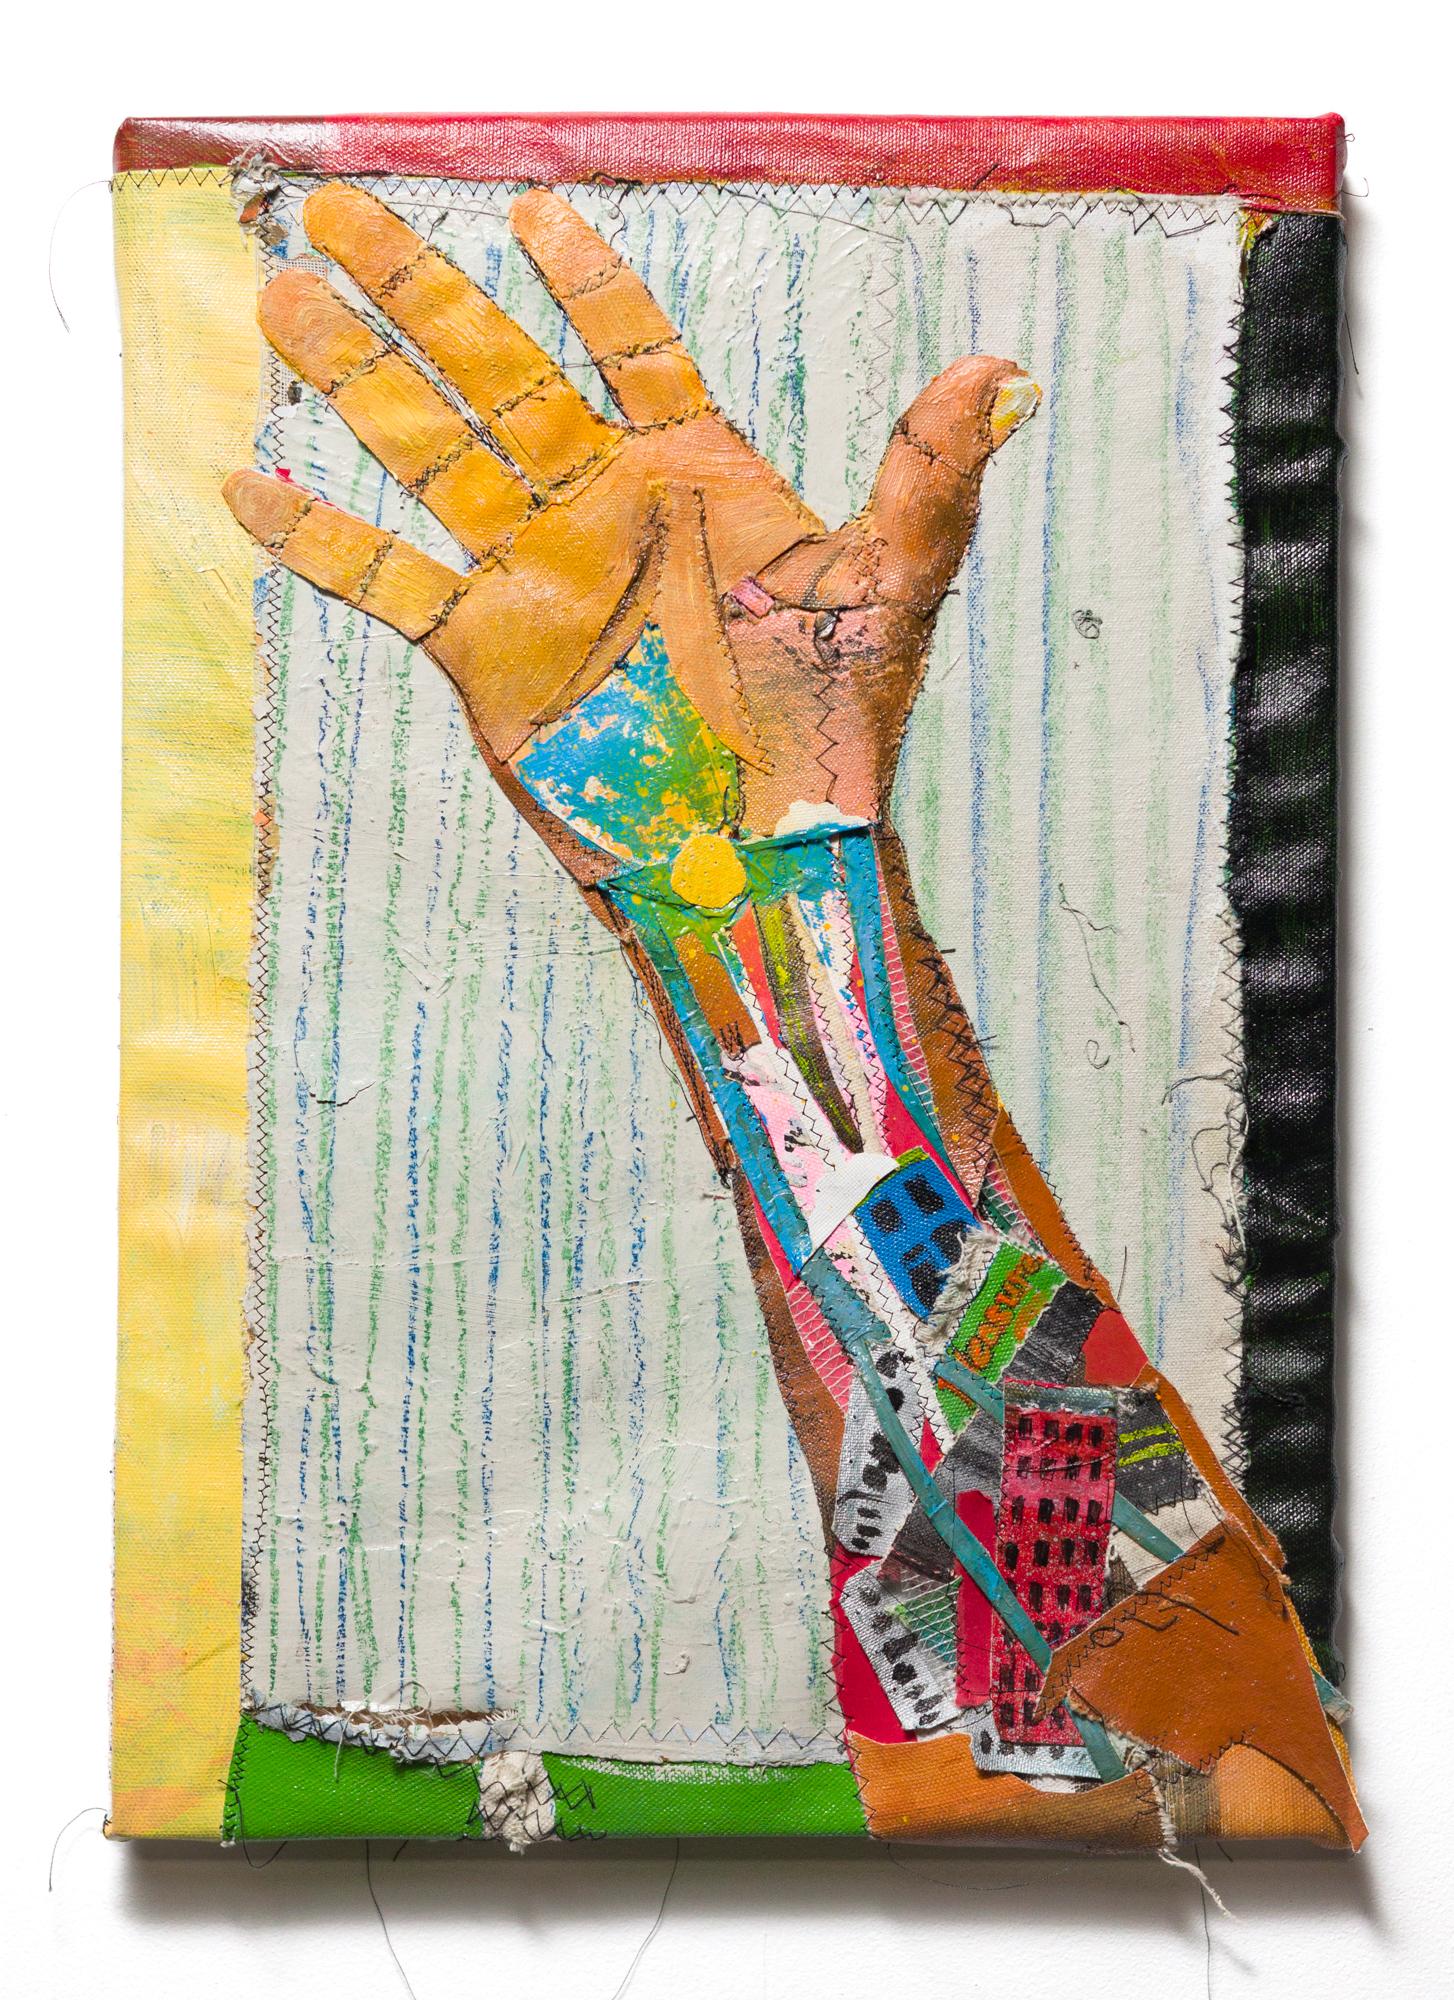 "DNA, The Dissection (Version 6)", Sewn Mixed Media, Anatomy Motif, Hands, colla - Painting by Eustace Mamba